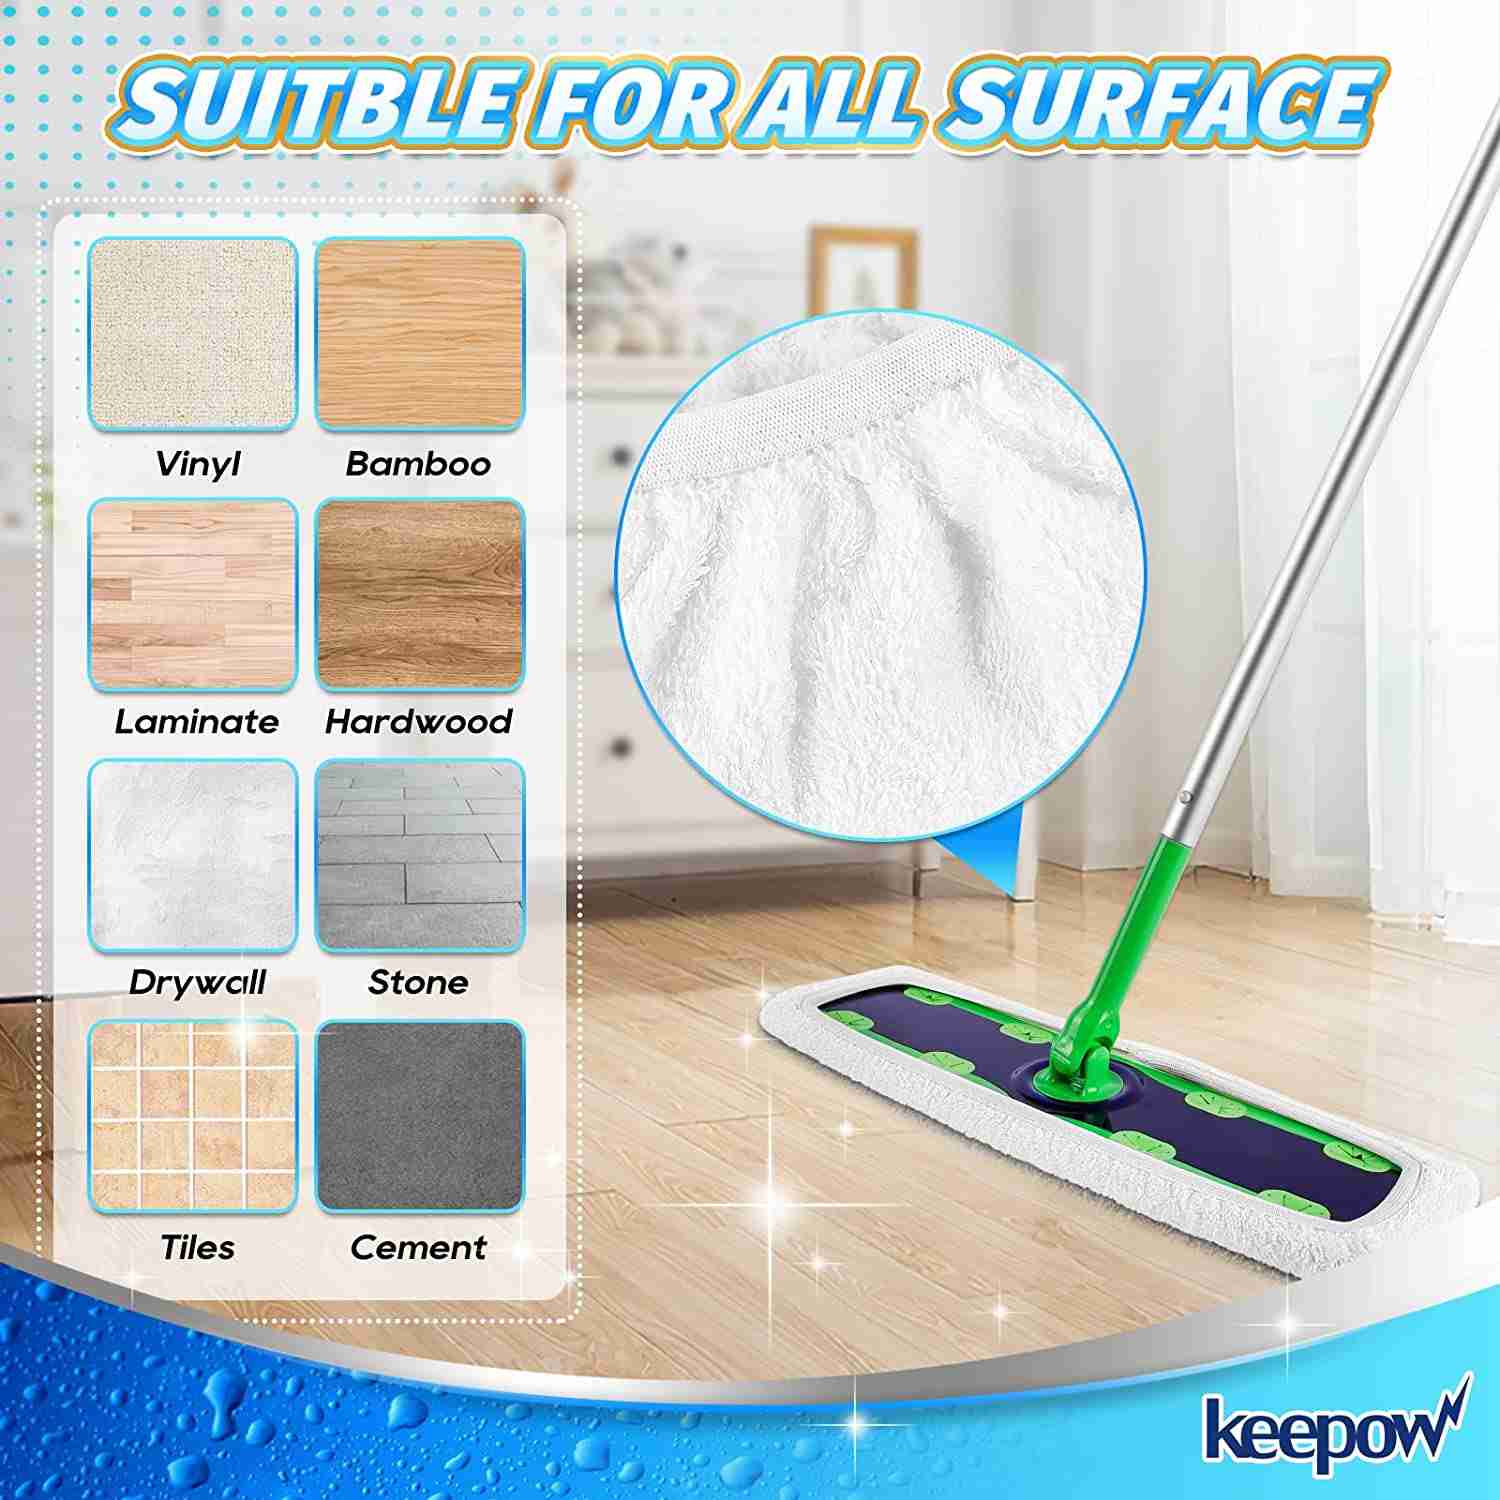 6-Pack KEEPOW Reusable XL Dry Sweeping Cloths for Swiffer Sweeper X-Large Mop, XL Wet Pads Refills